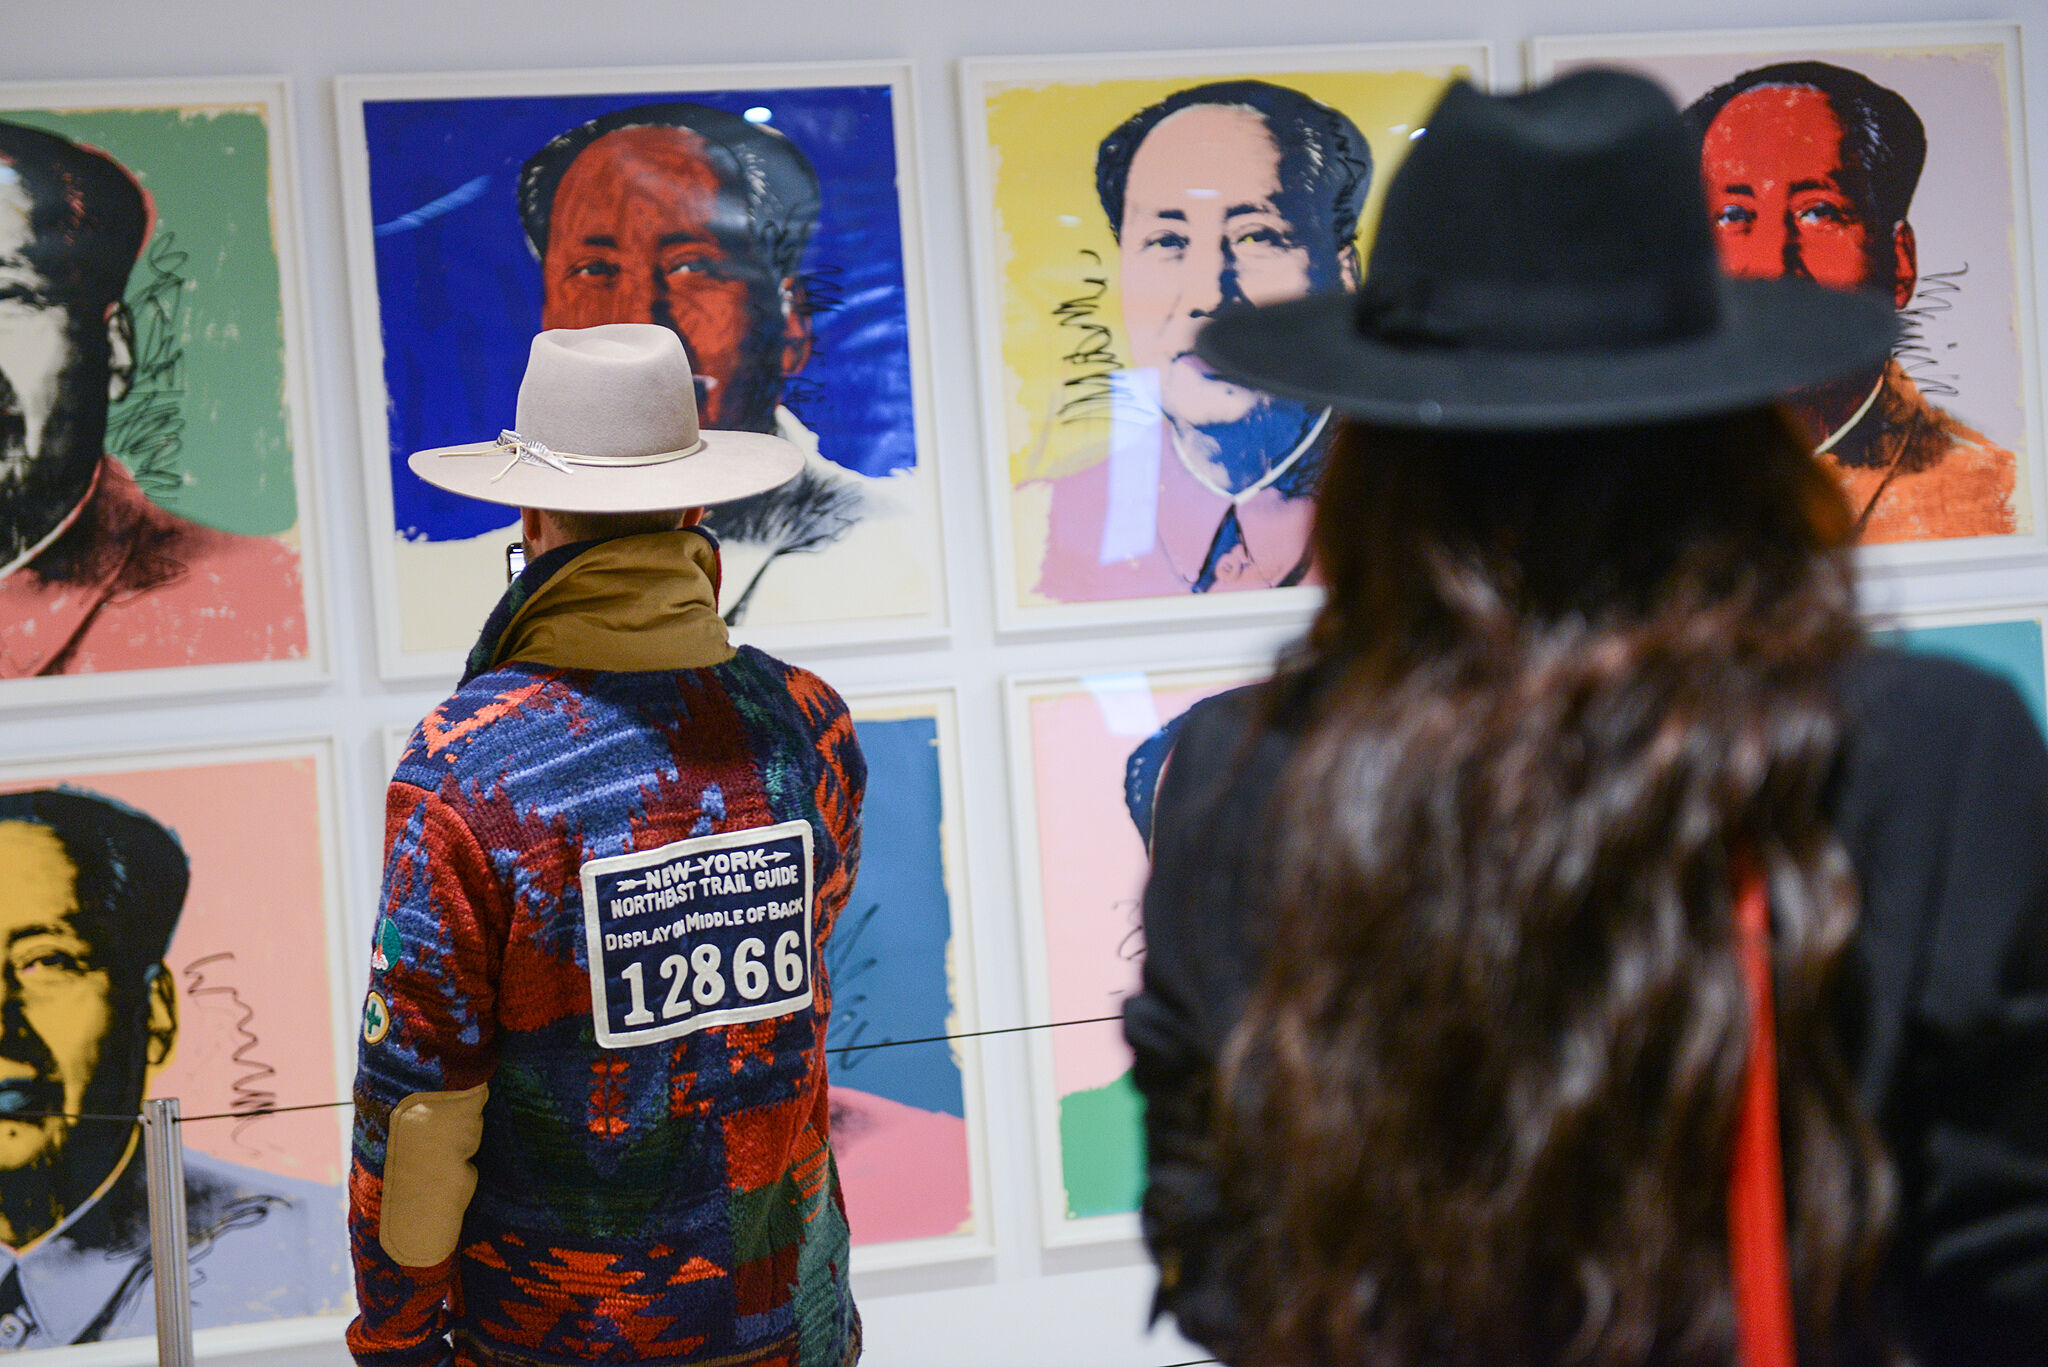 Two people observing colorful Warhol-style portraits in an art gallery.